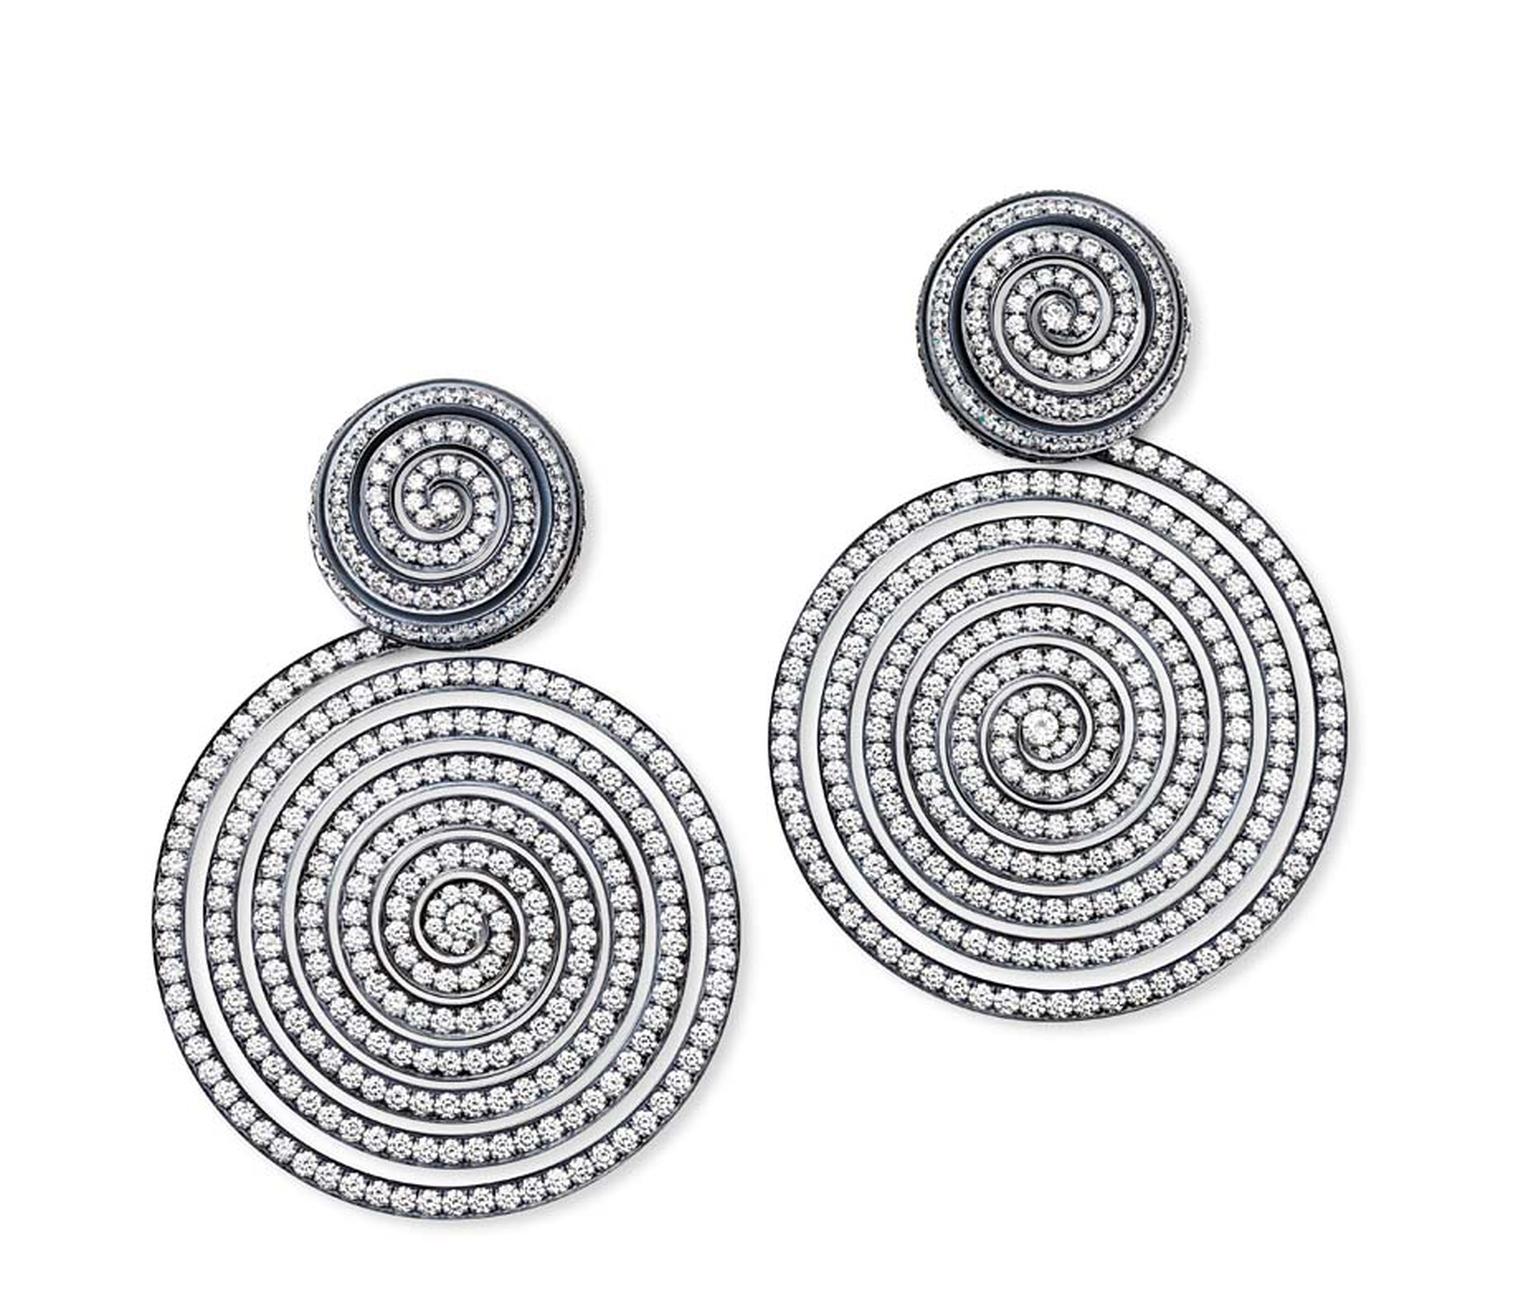 Hemmerle earrings in silver and gold with diamonds.